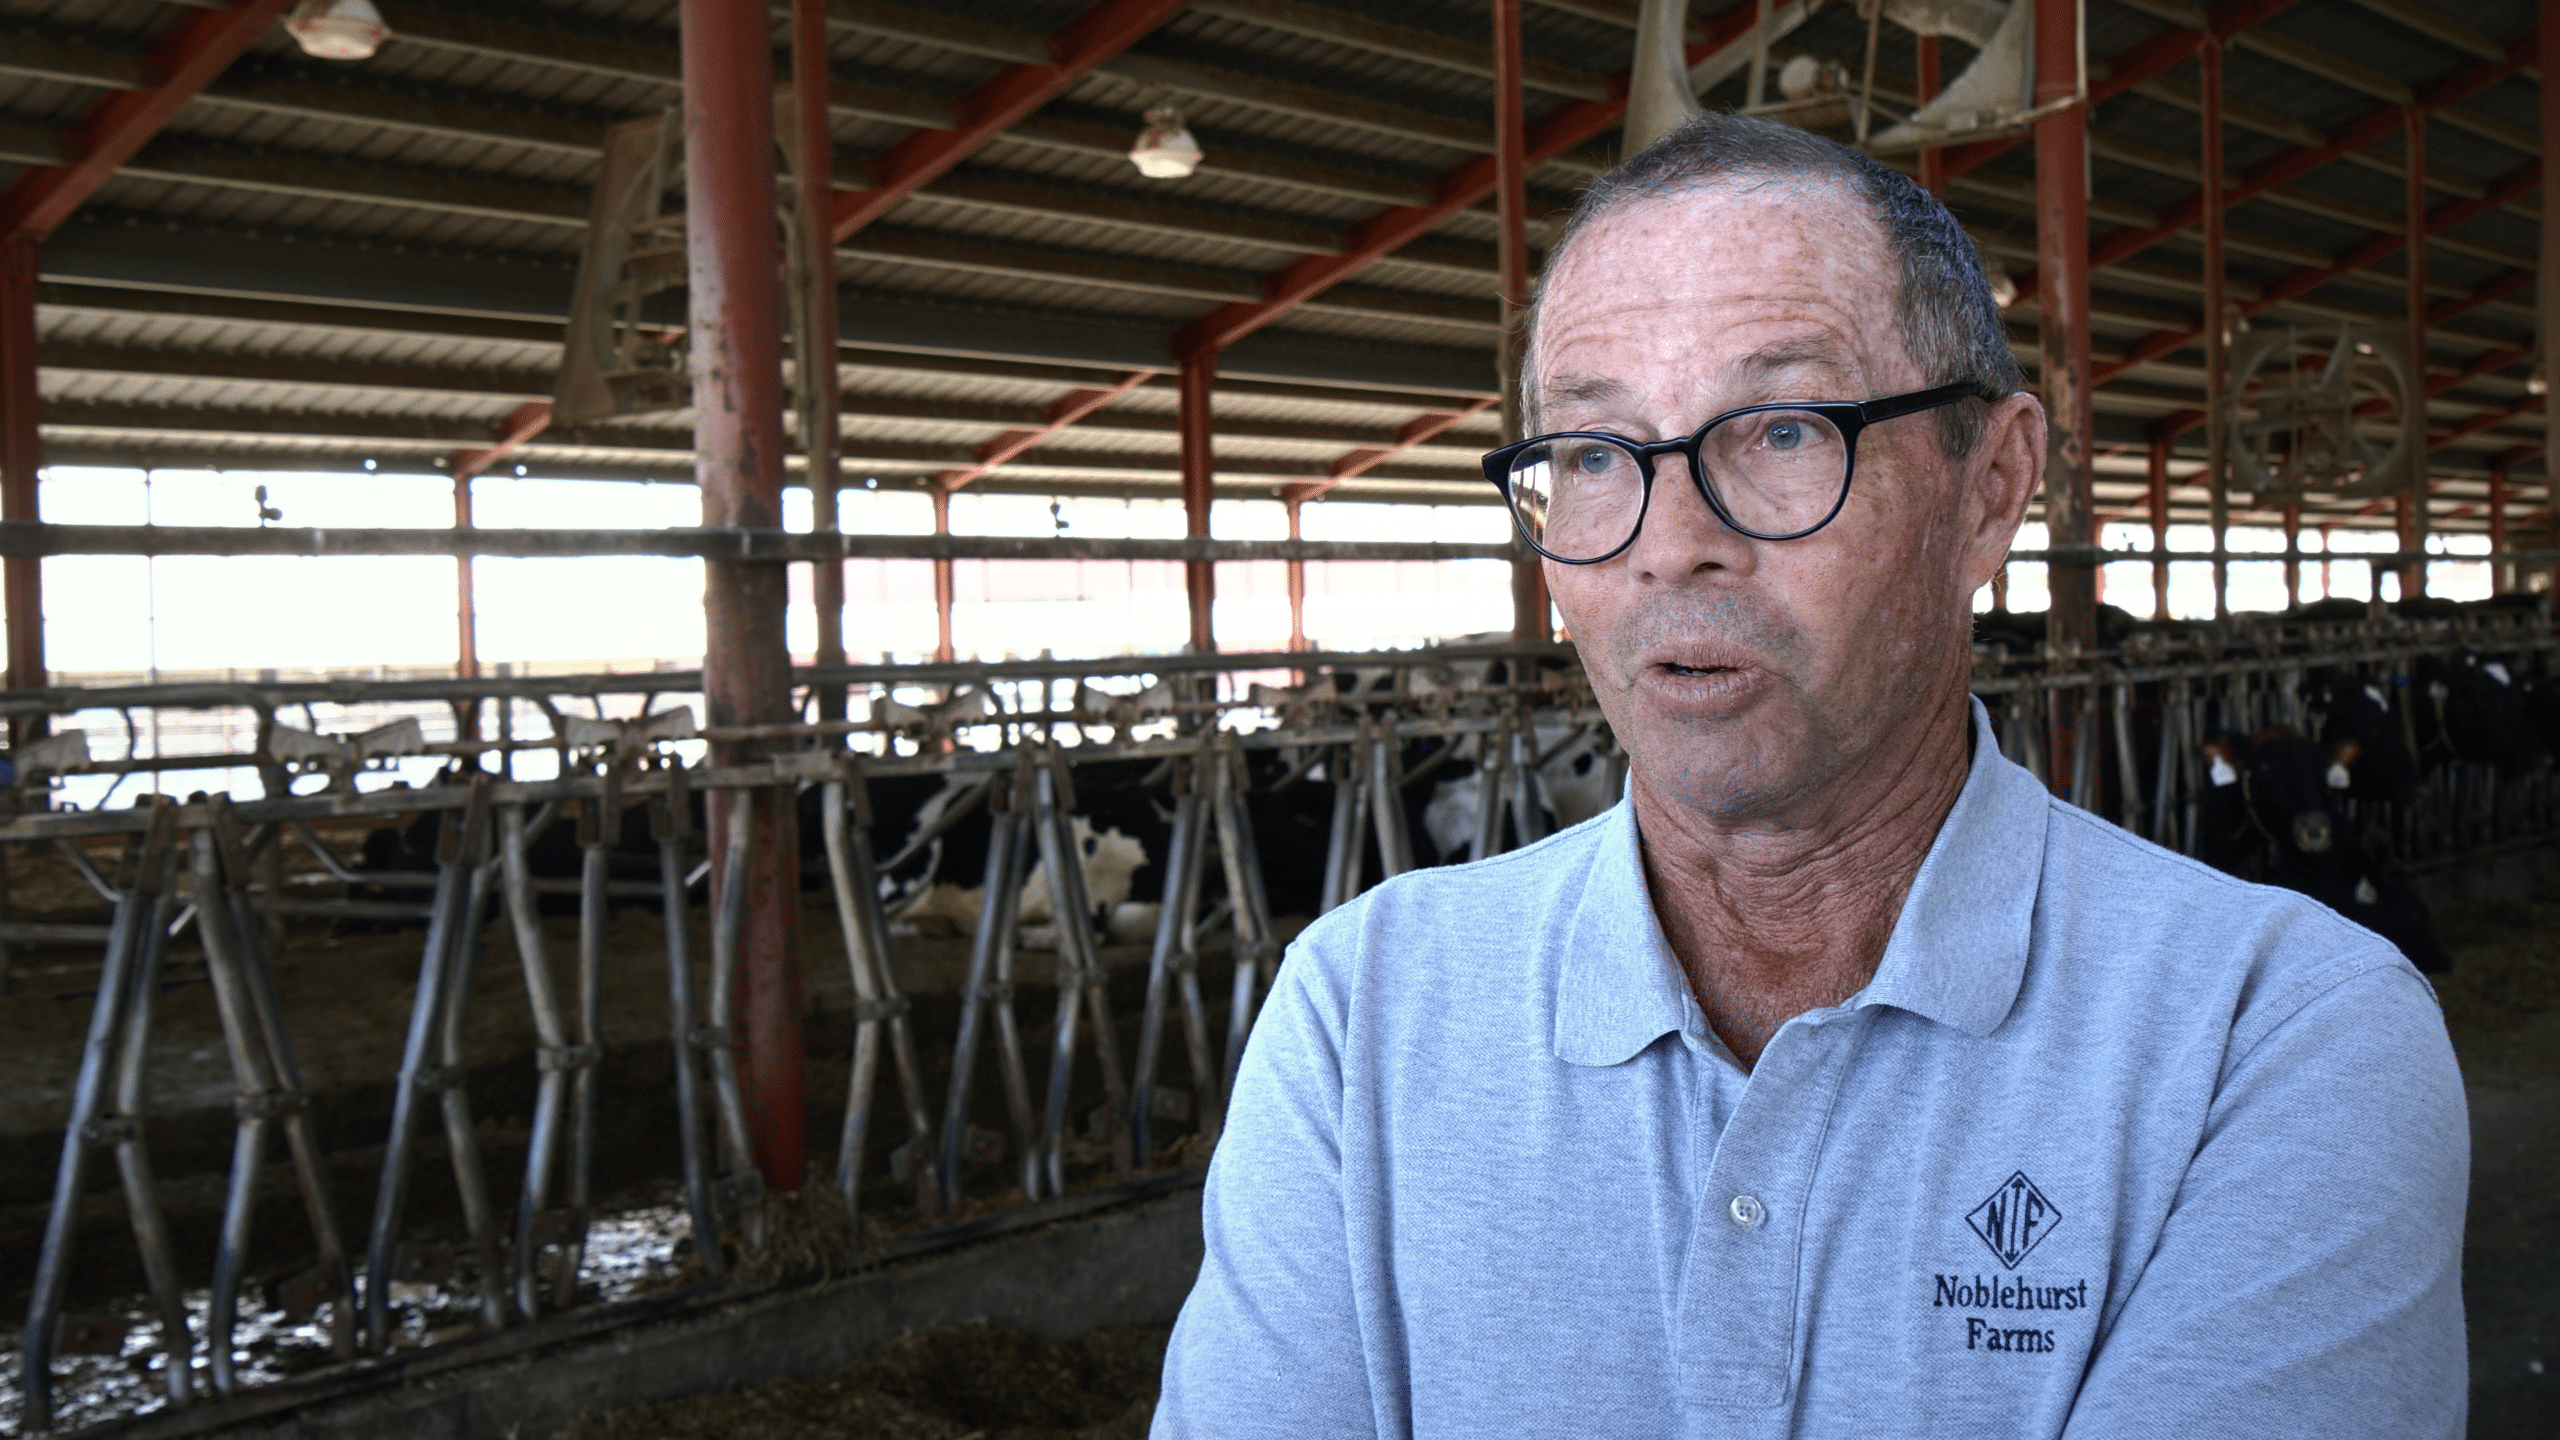 ‘This American Dairy Farmer’ Video Series Connects Consumers with the Passion of the People who Produce their Food